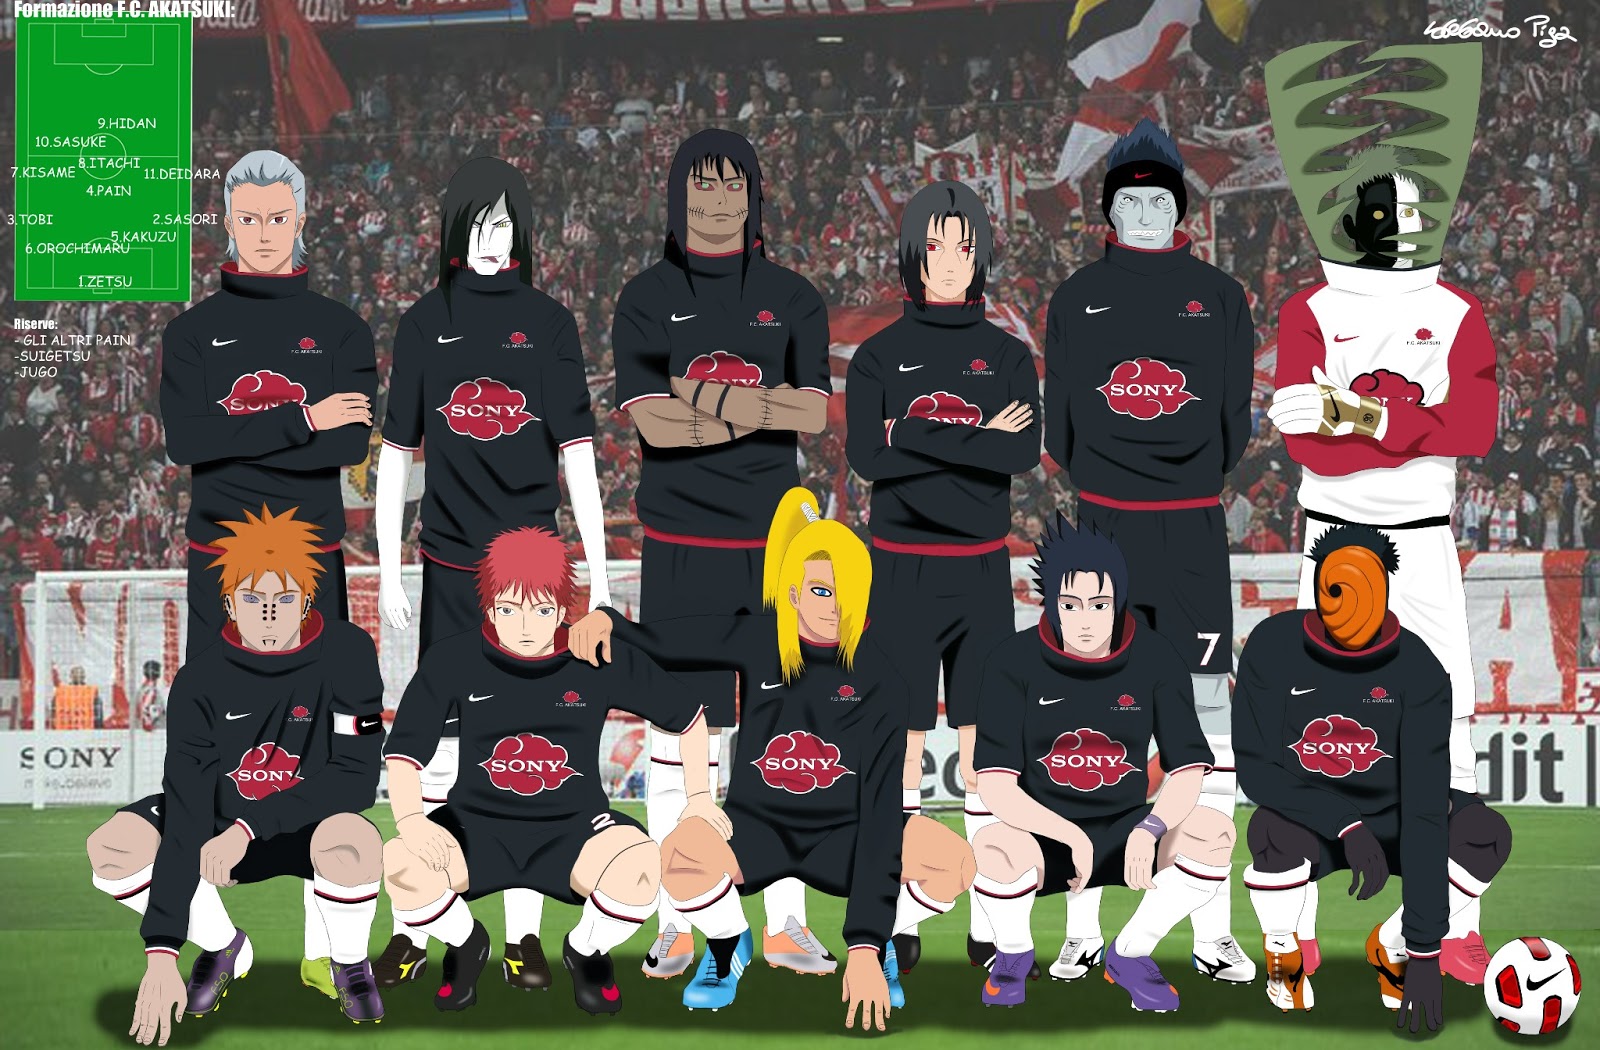 Manchester United In Anime And Cartoon Pocong Ngesot 48